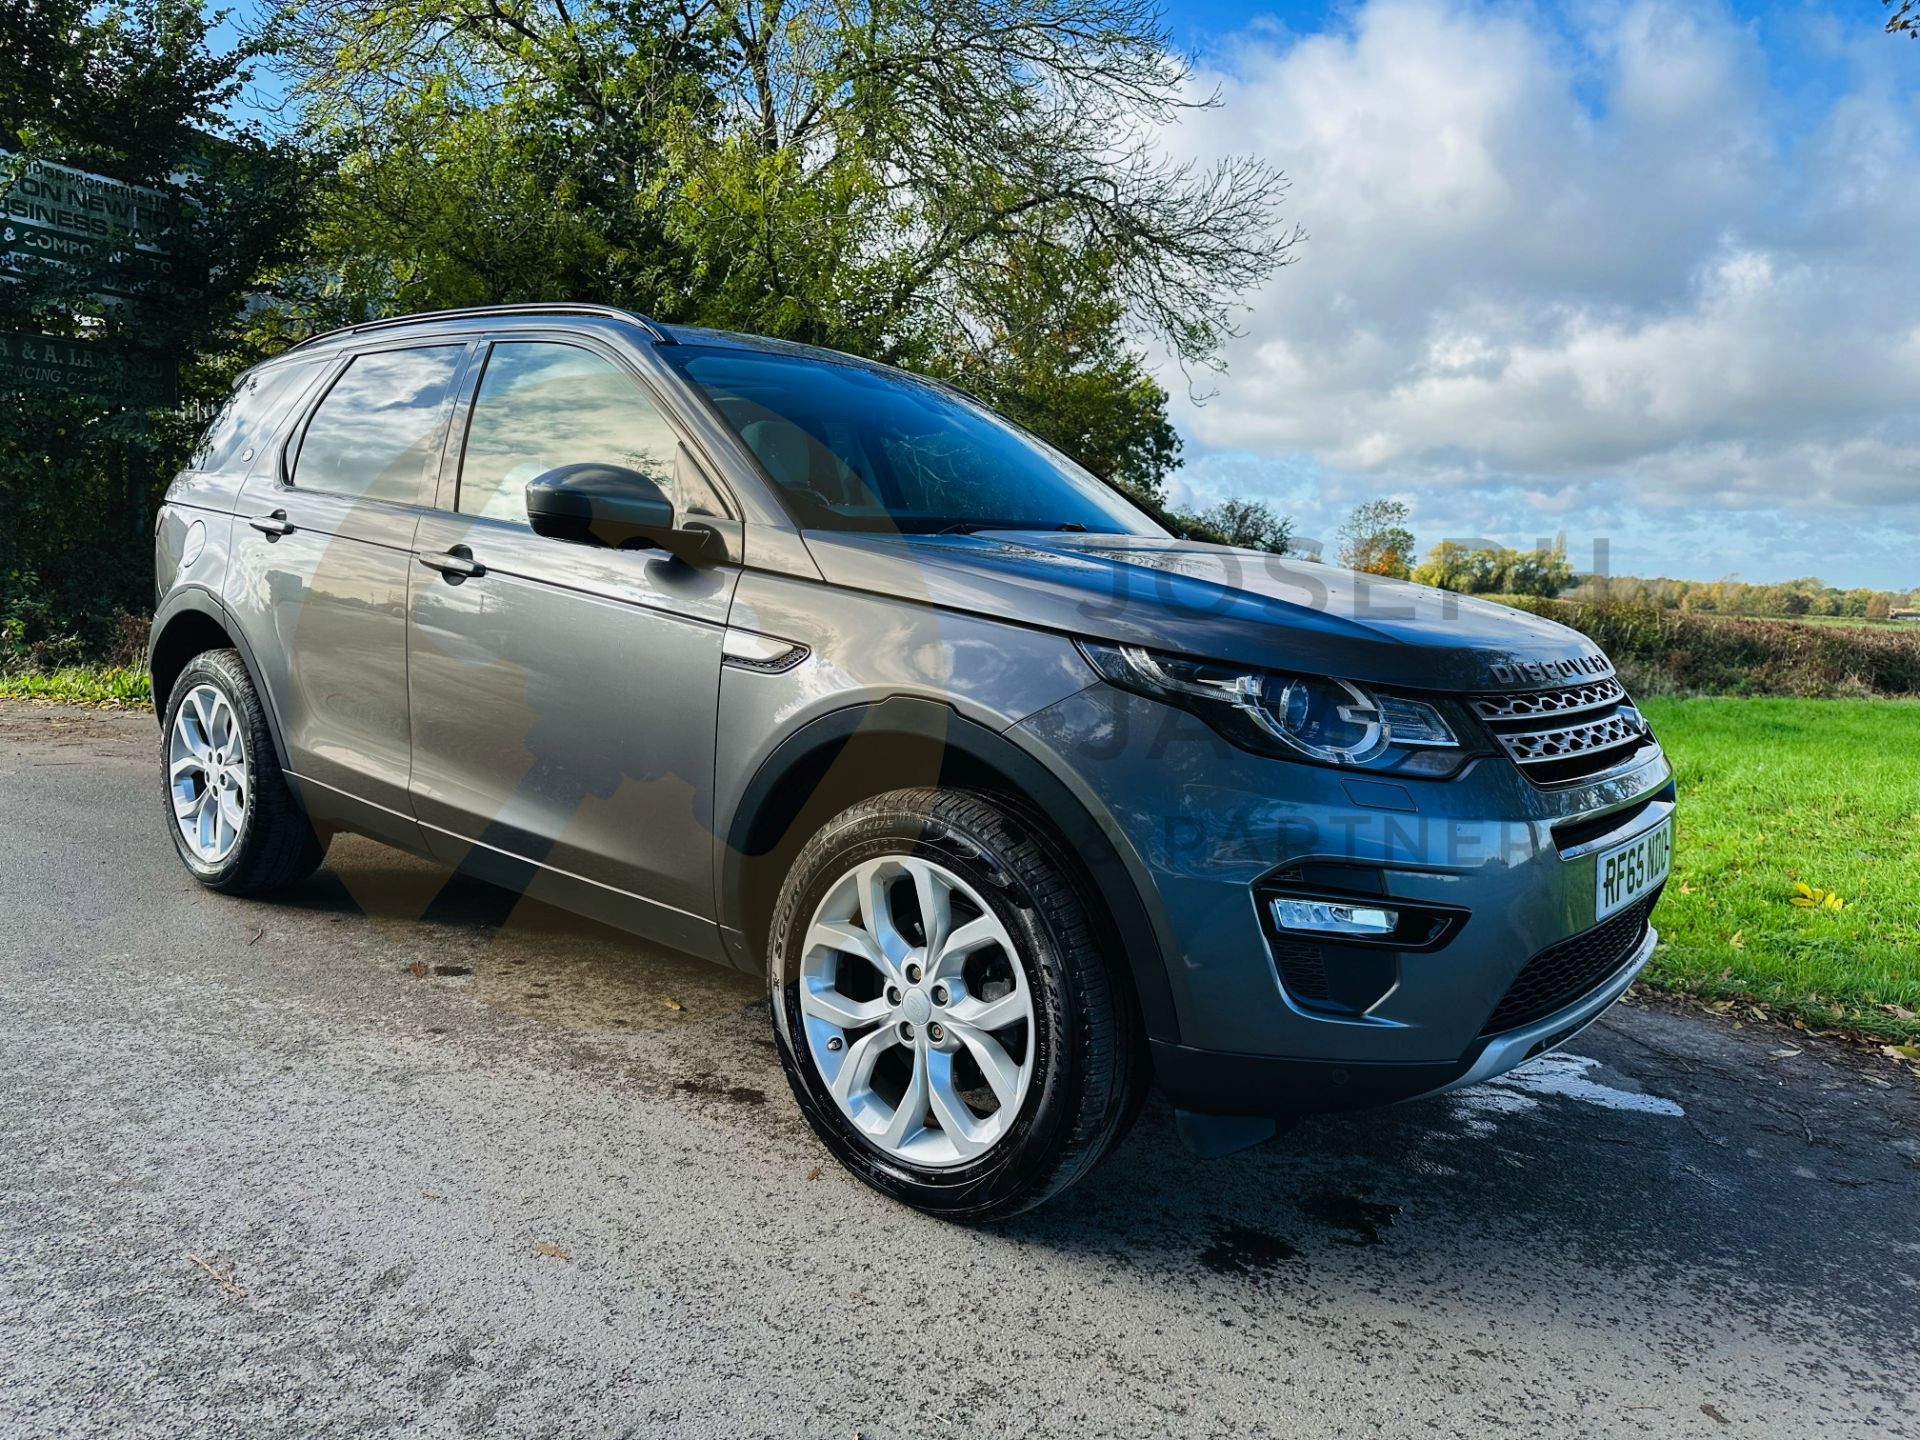 (ON SALE) LAND ROVER DISCOVERY SPORT *HSE EDITION* 7 SEATER SUV (2016 MODEL) 2.0 TD4-AUTO STOP/START - Image 2 of 56